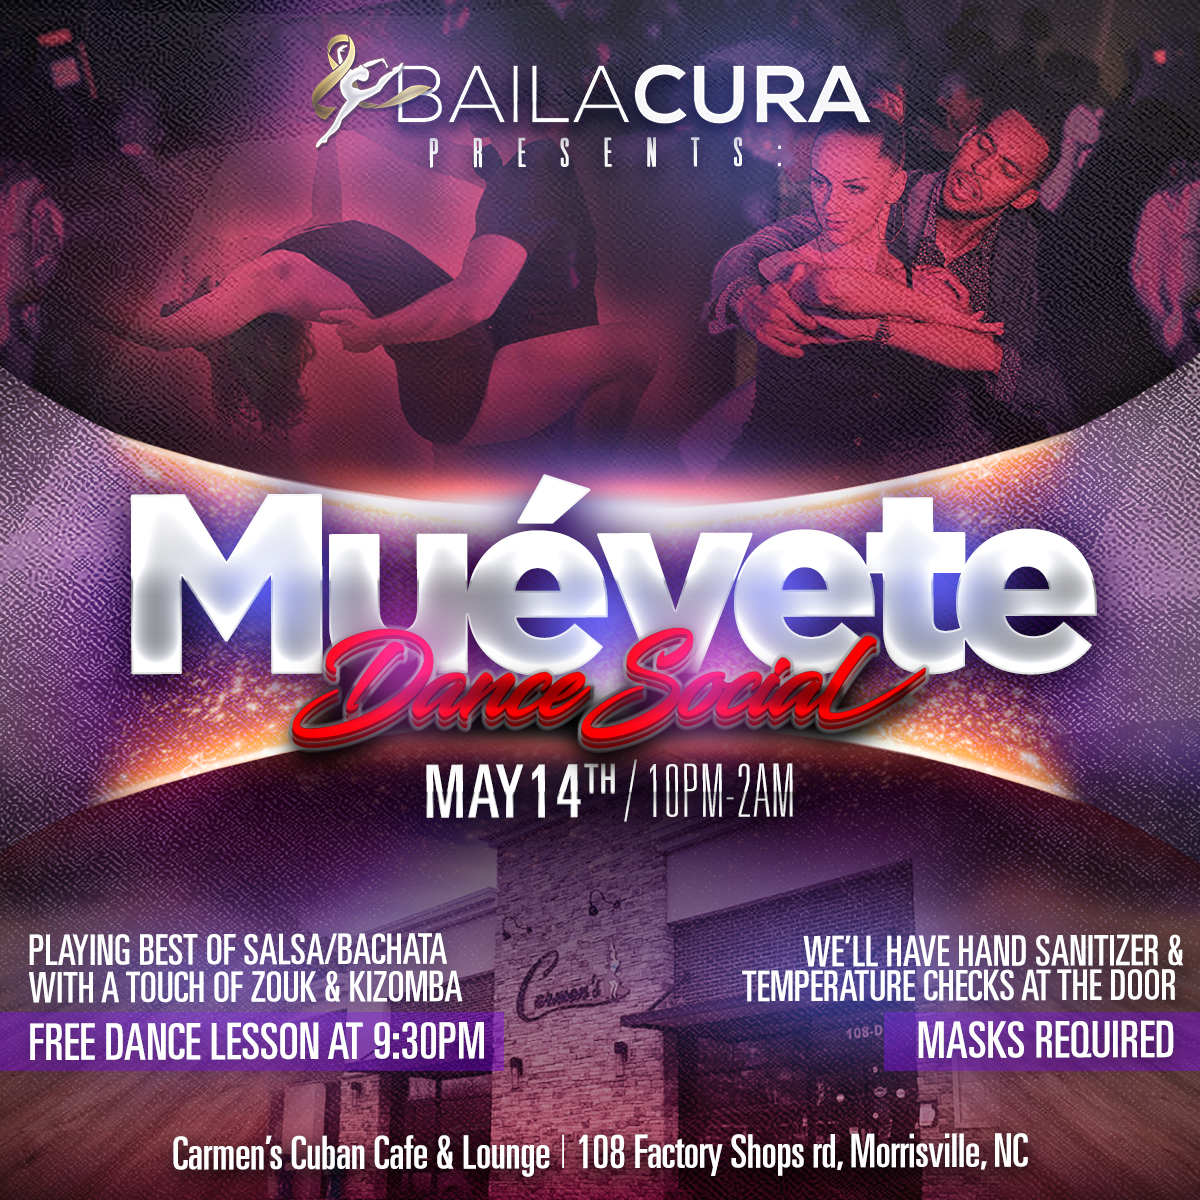 Muevete Dance Social hosted by Bailacura